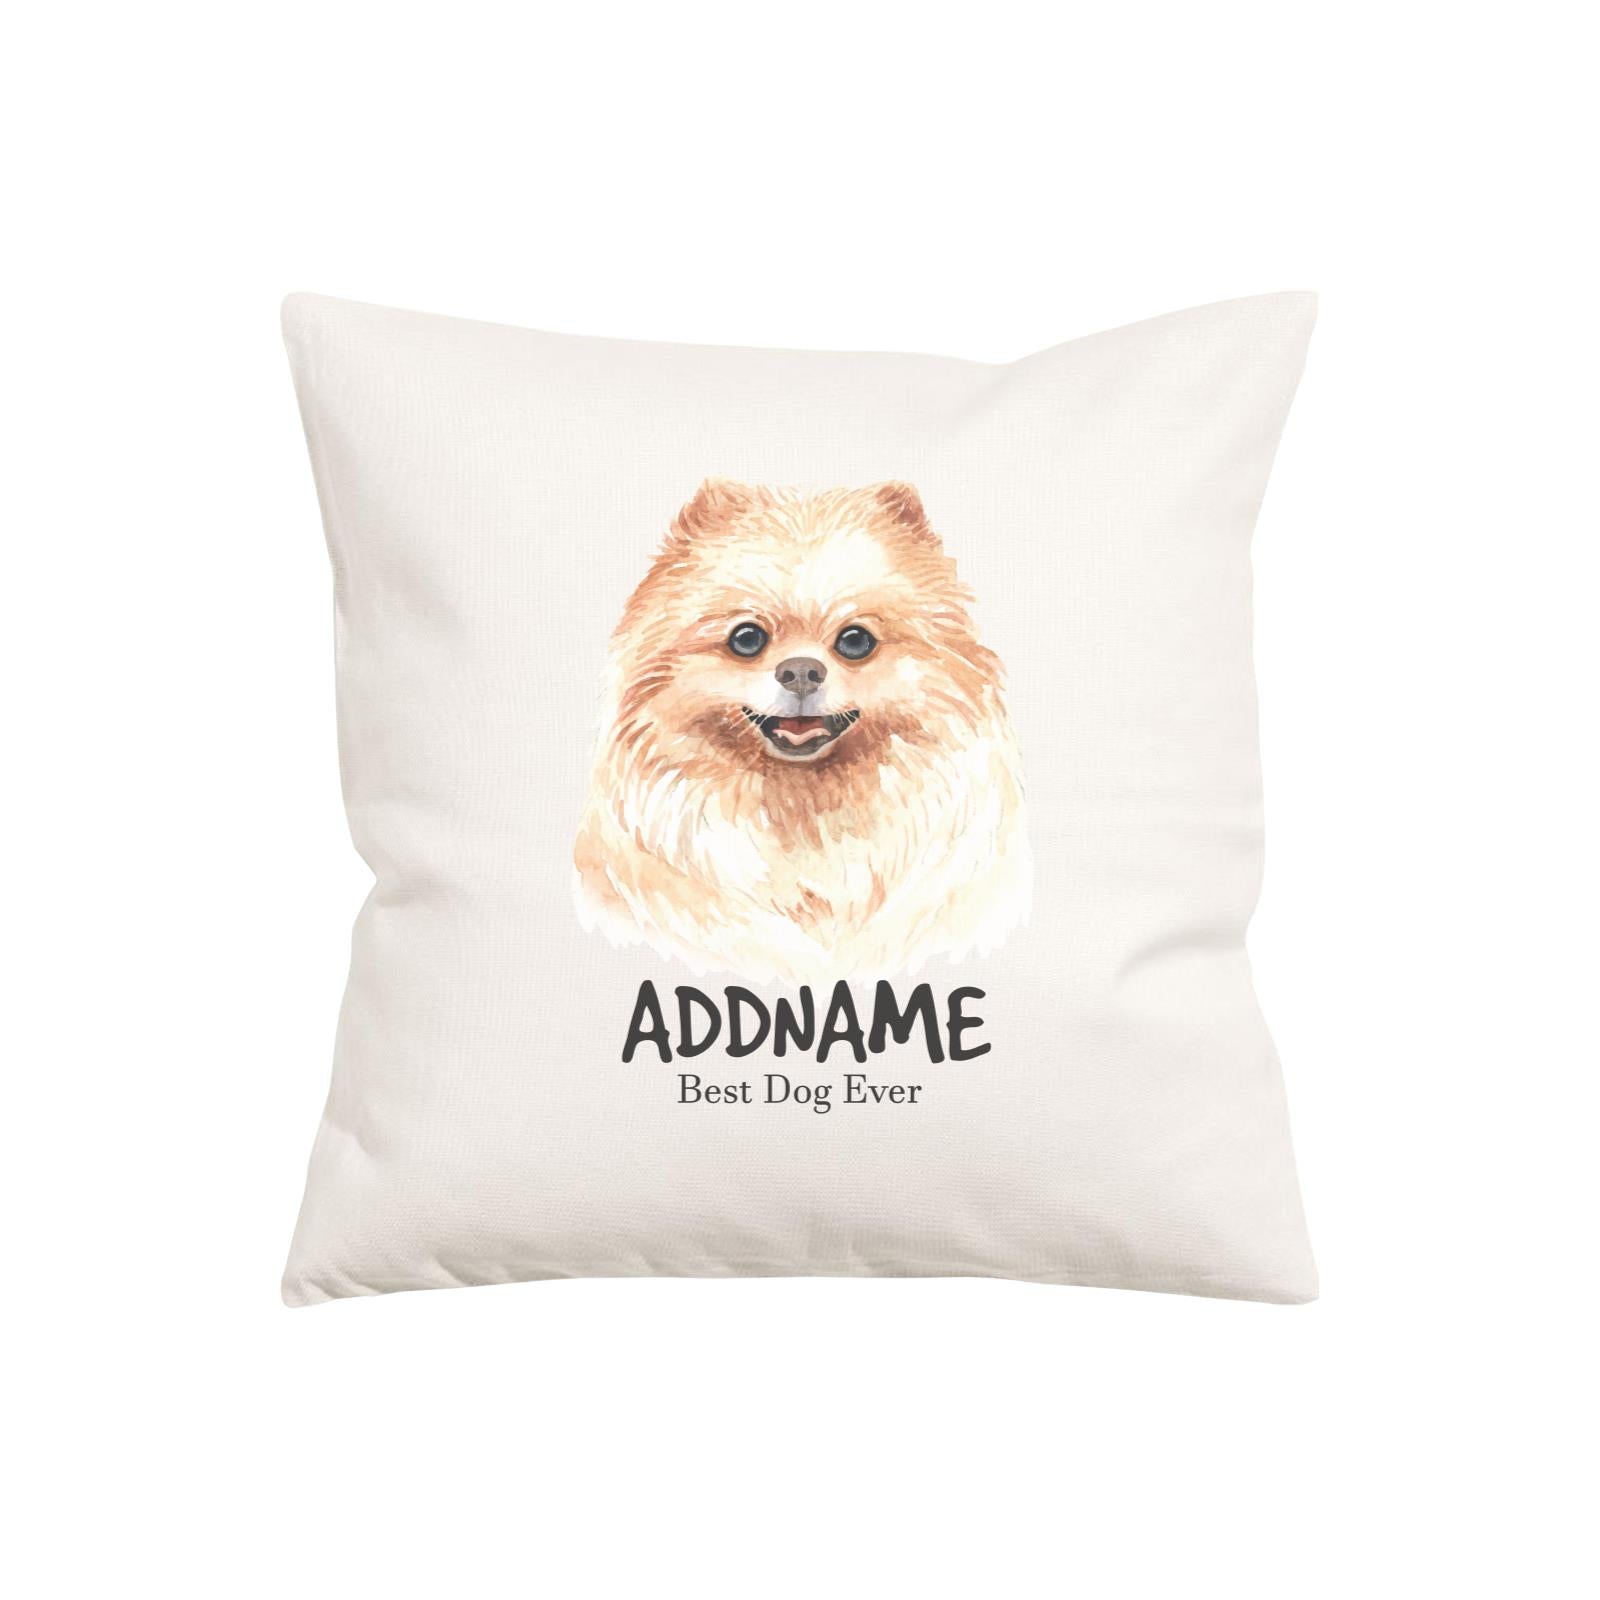 Watercolor Dog Series Pomeranian Best Dog Ever Addname Pillow Cushion